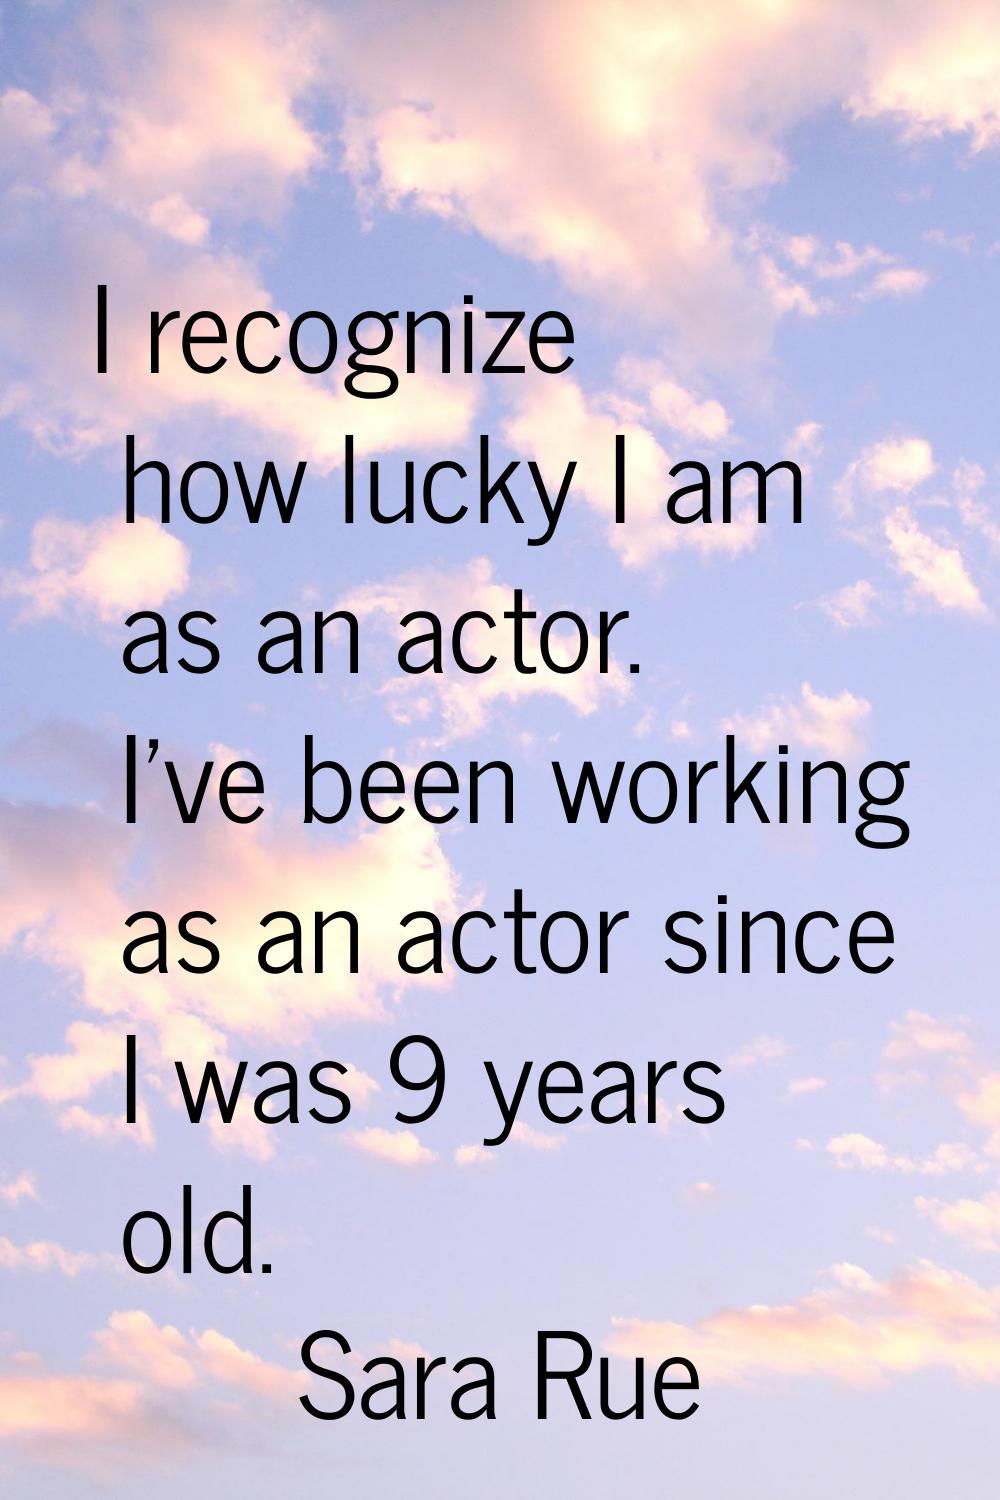 I recognize how lucky I am as an actor. I've been working as an actor since I was 9 years old.